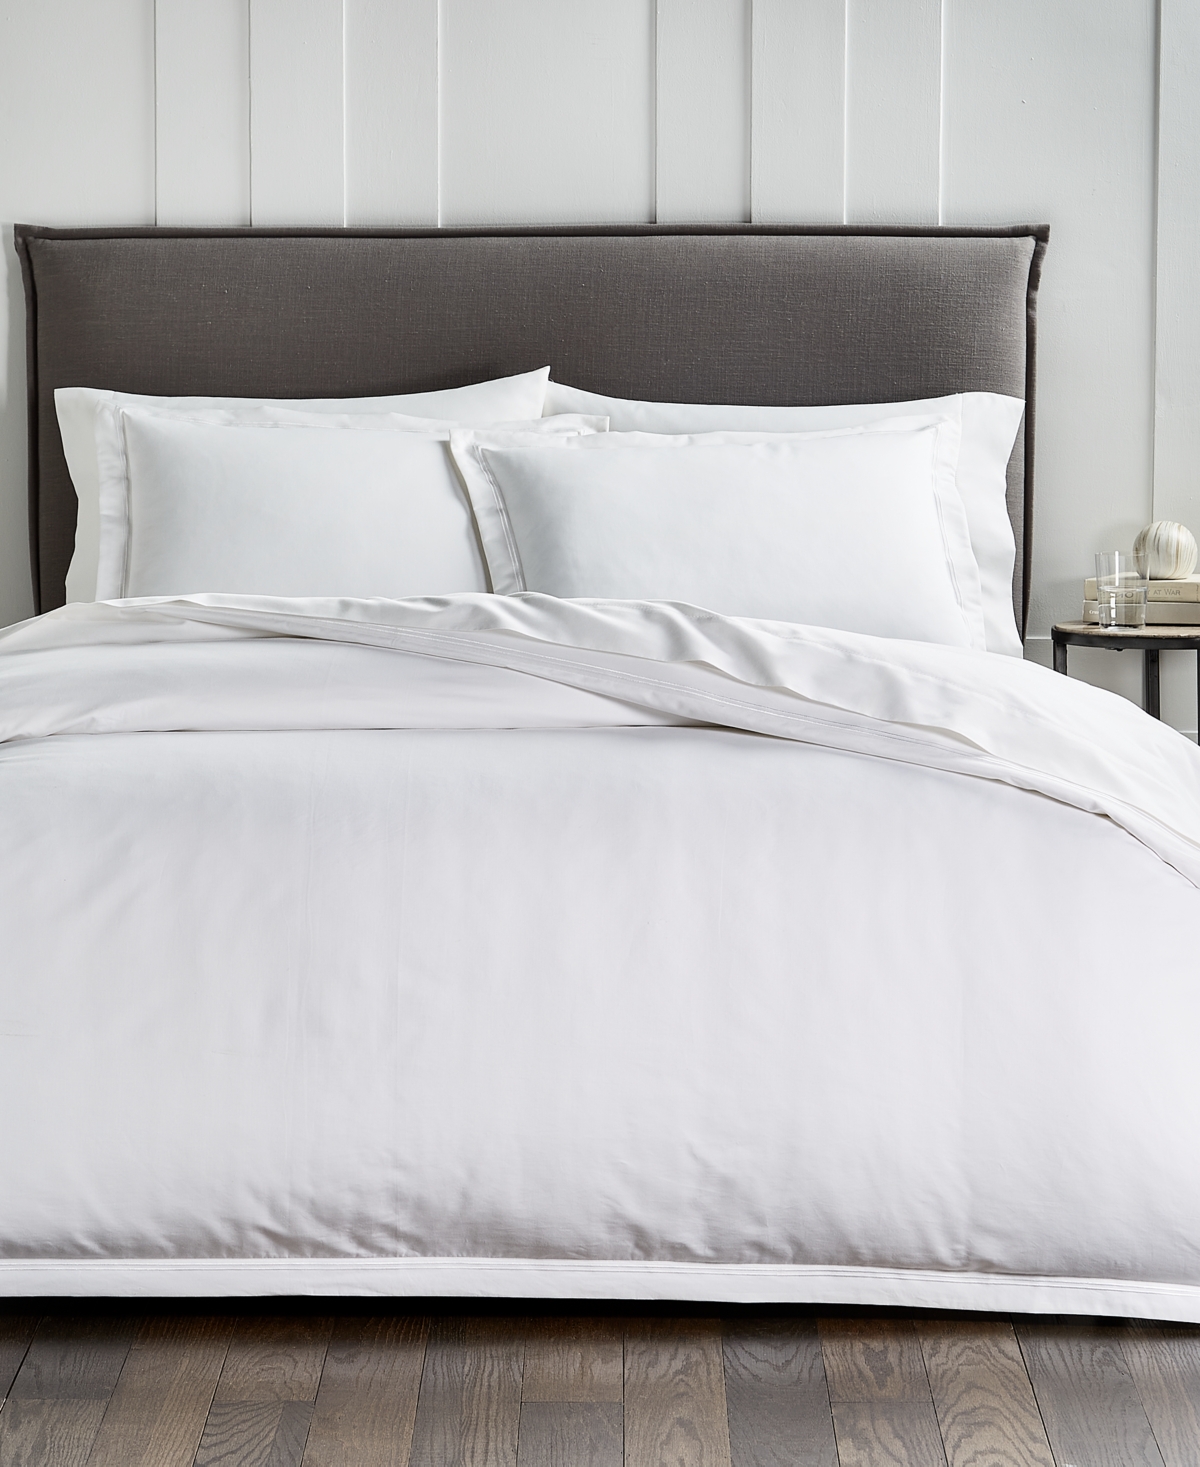 HOTEL COLLECTION SUPIMA COTTON 1000-THREAD COUNT 3-PC. DUVET COVER SET, FULL/QUEEN, CREATED FOR MACY'S